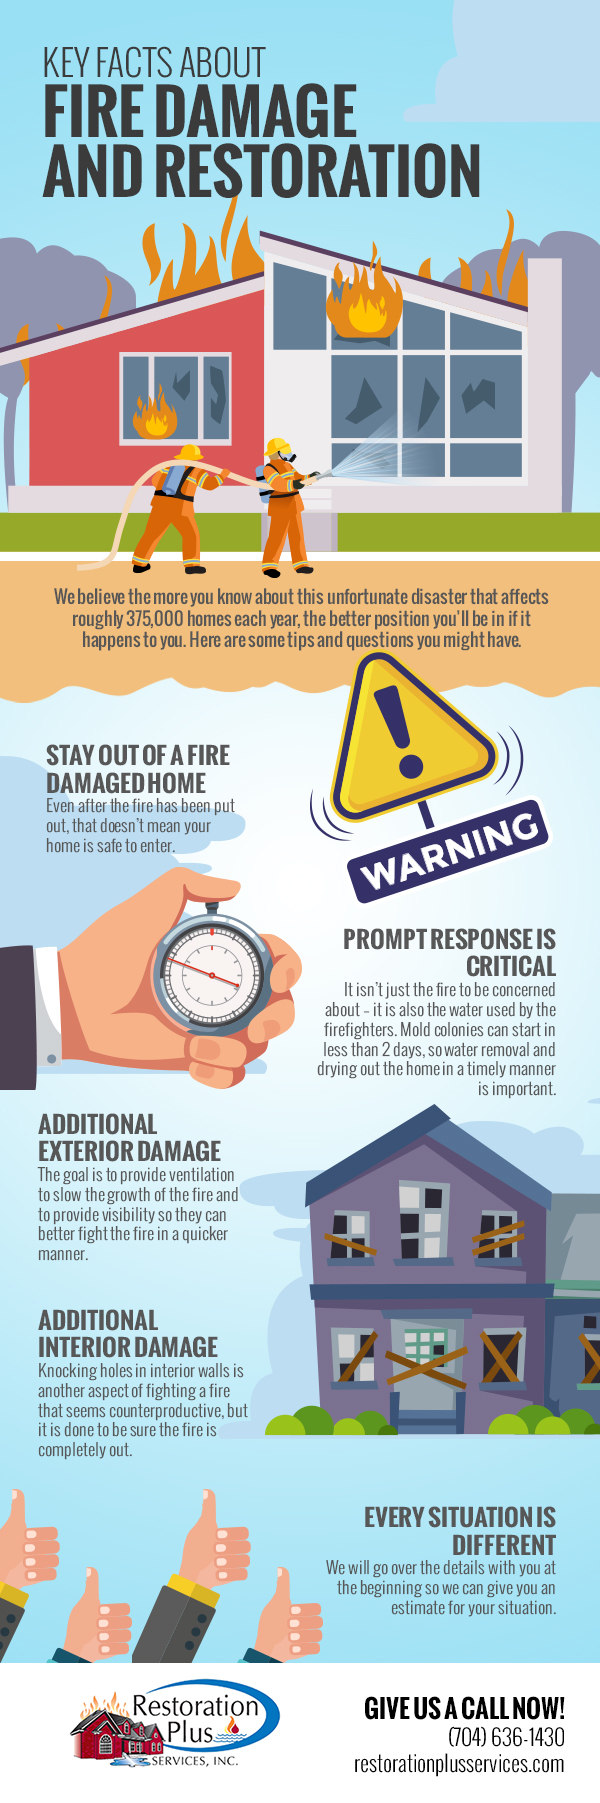 Key facts about fire damage and restoration tips